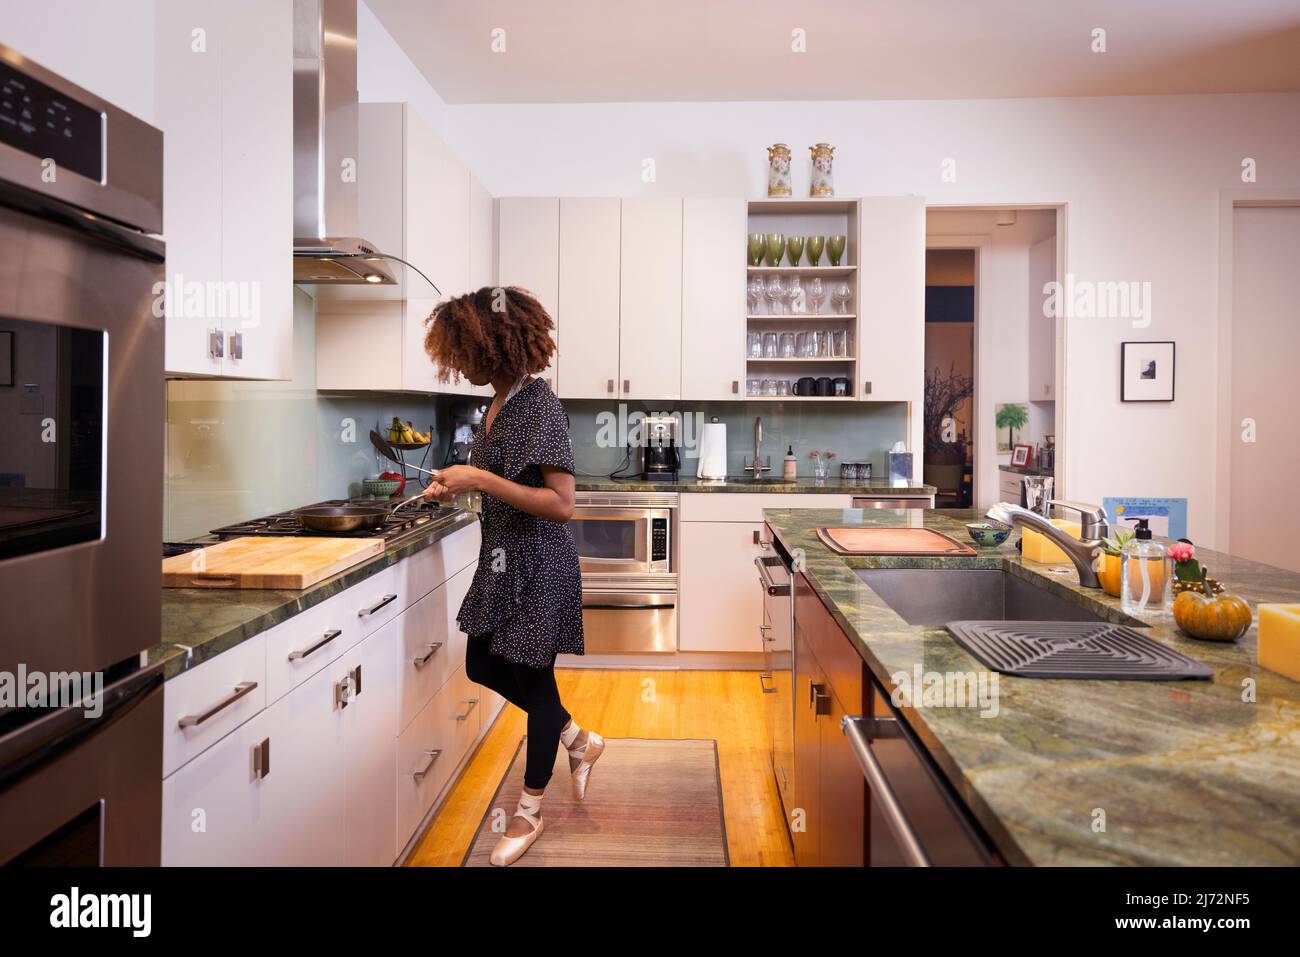 Female ballet dancer cooking in a residential kitchen Stock Photo